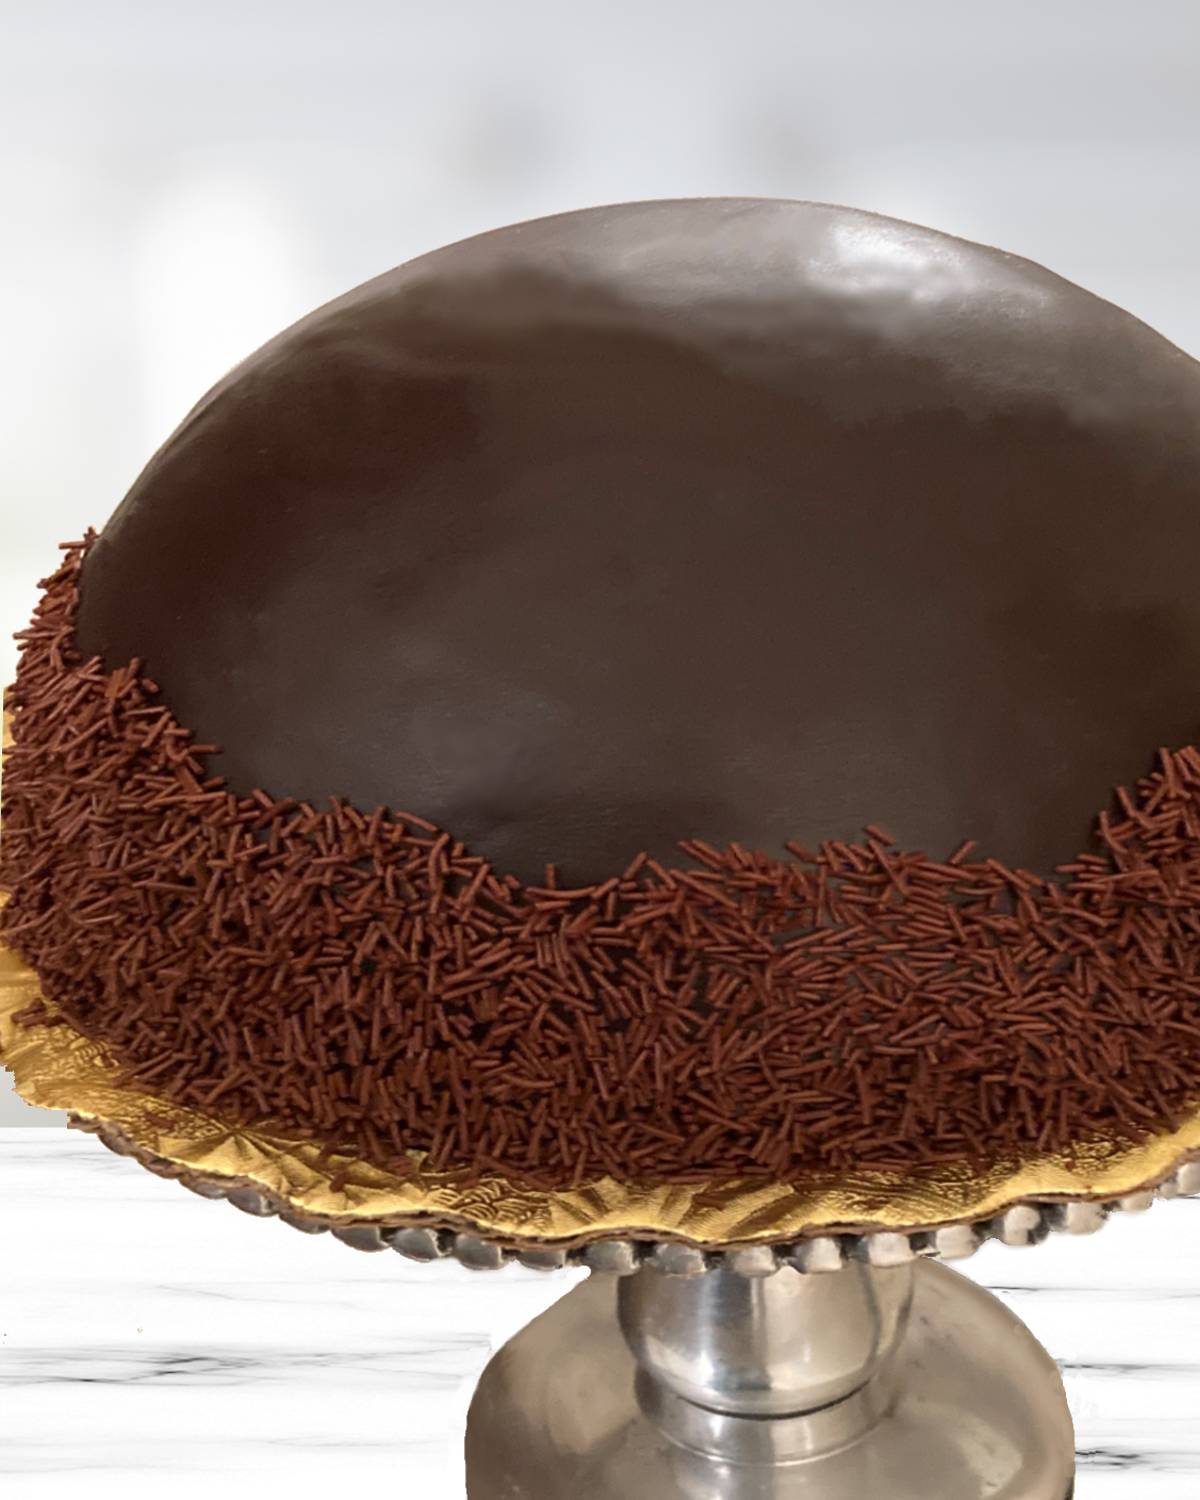 chocolate-mousse-bombe-cake-same-day-cake-delivery-dallas